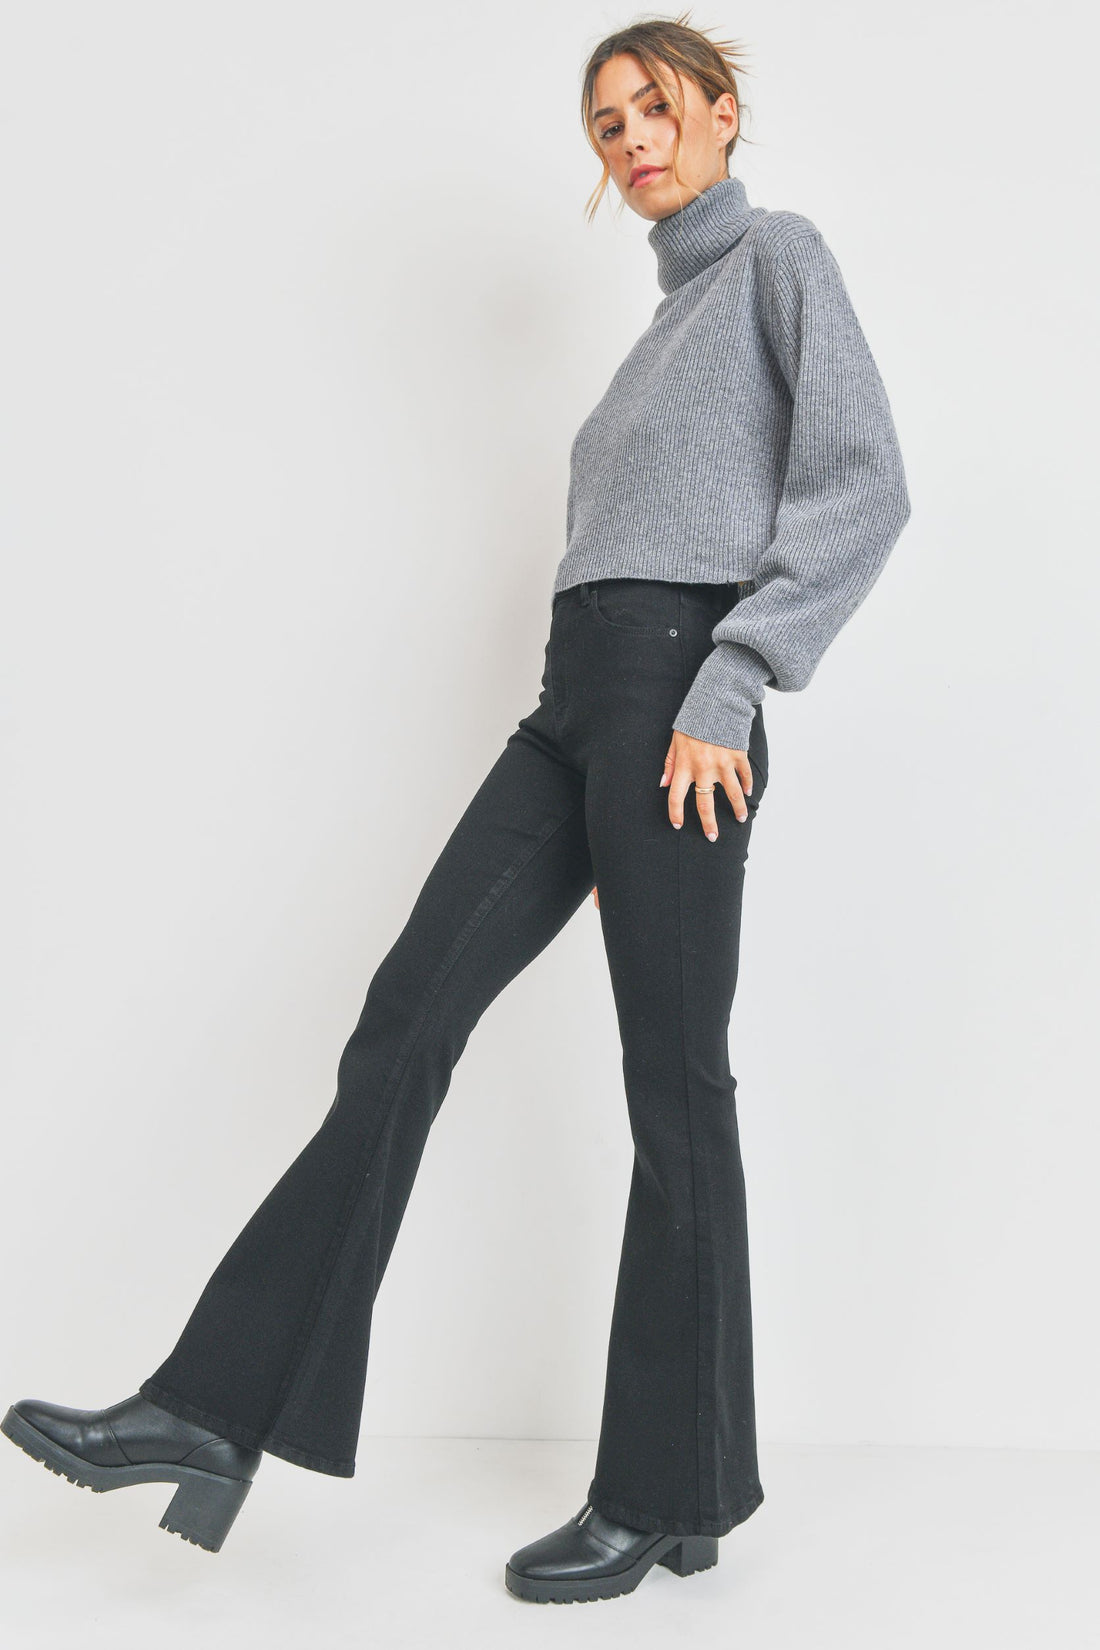 Jeans - High Rise Clean Bell Bottom (Black)